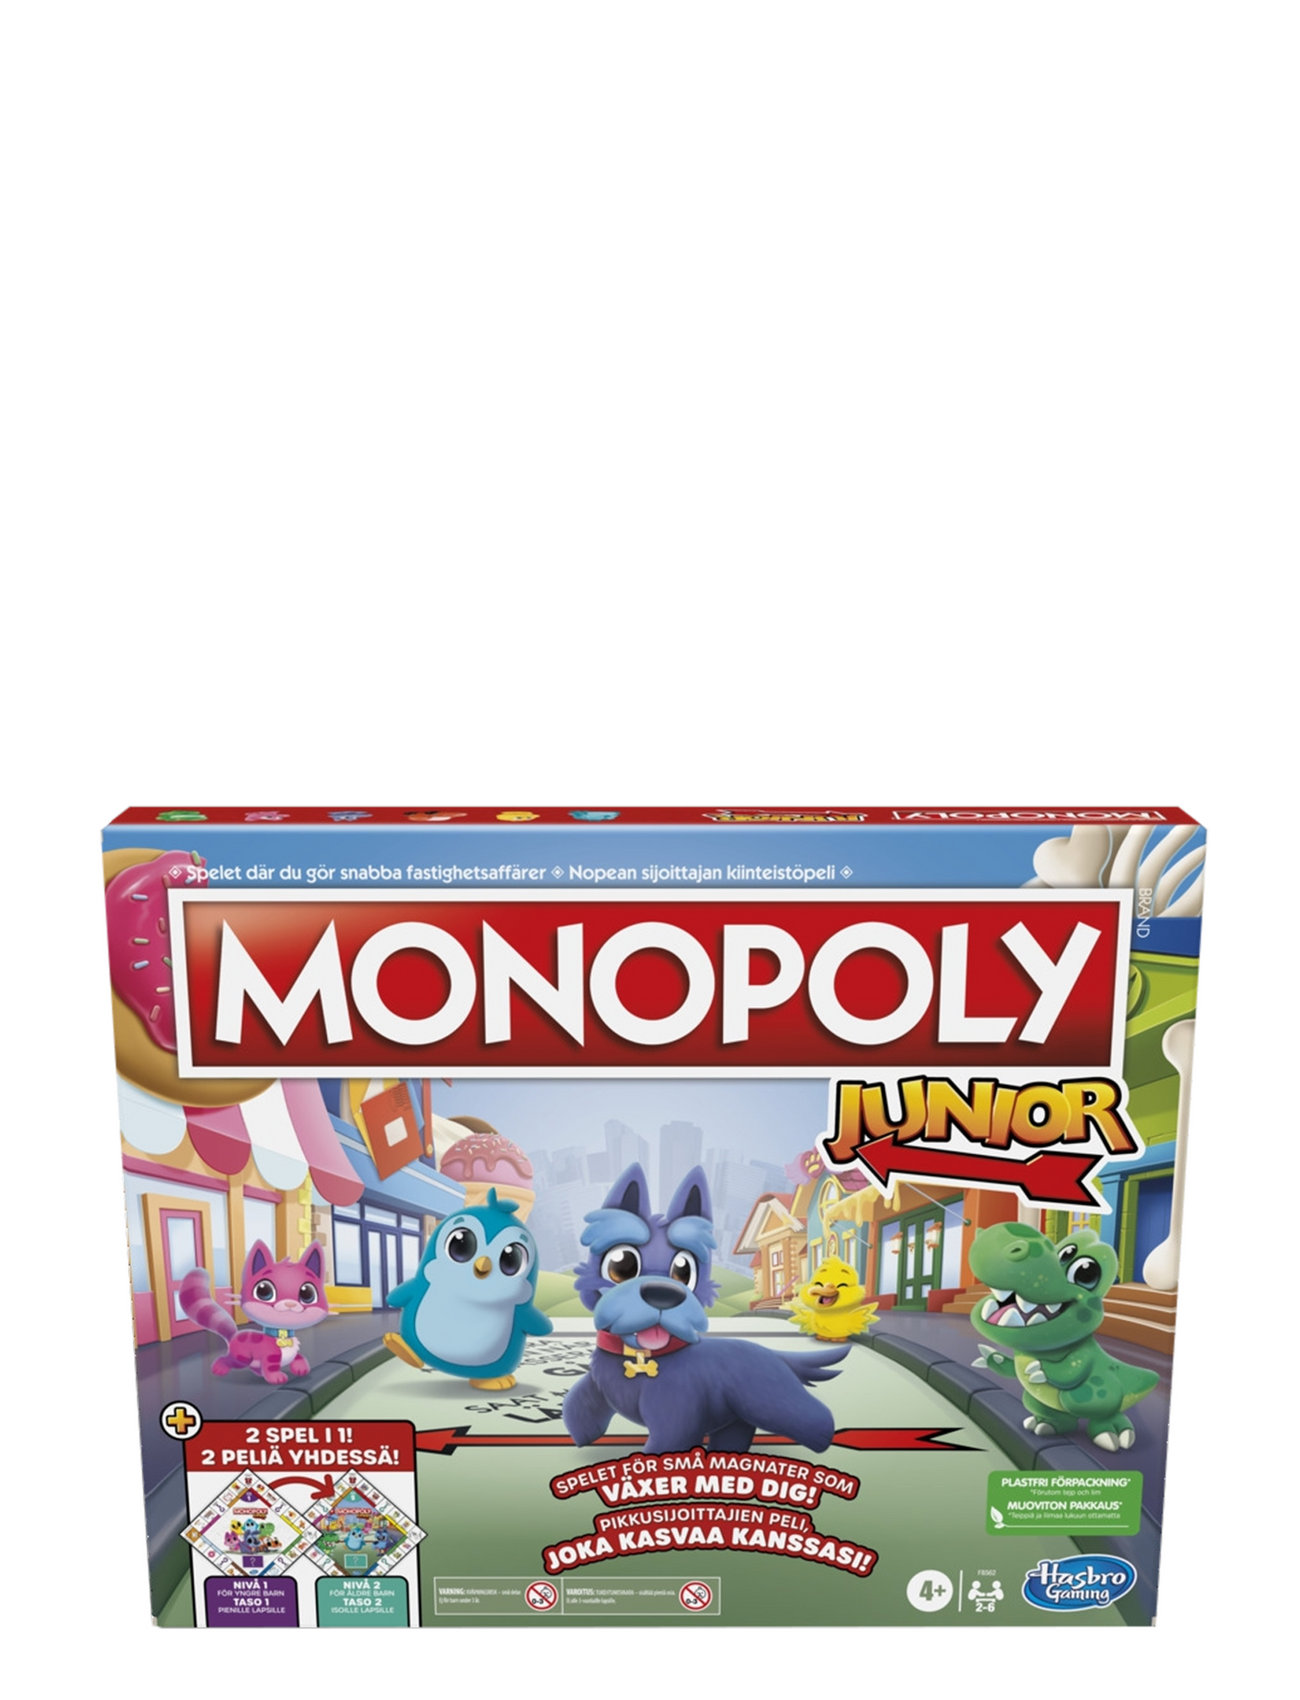 Monopoly Junior Toys Puzzles And Games Games Board Games Multi/patterned Monopoly